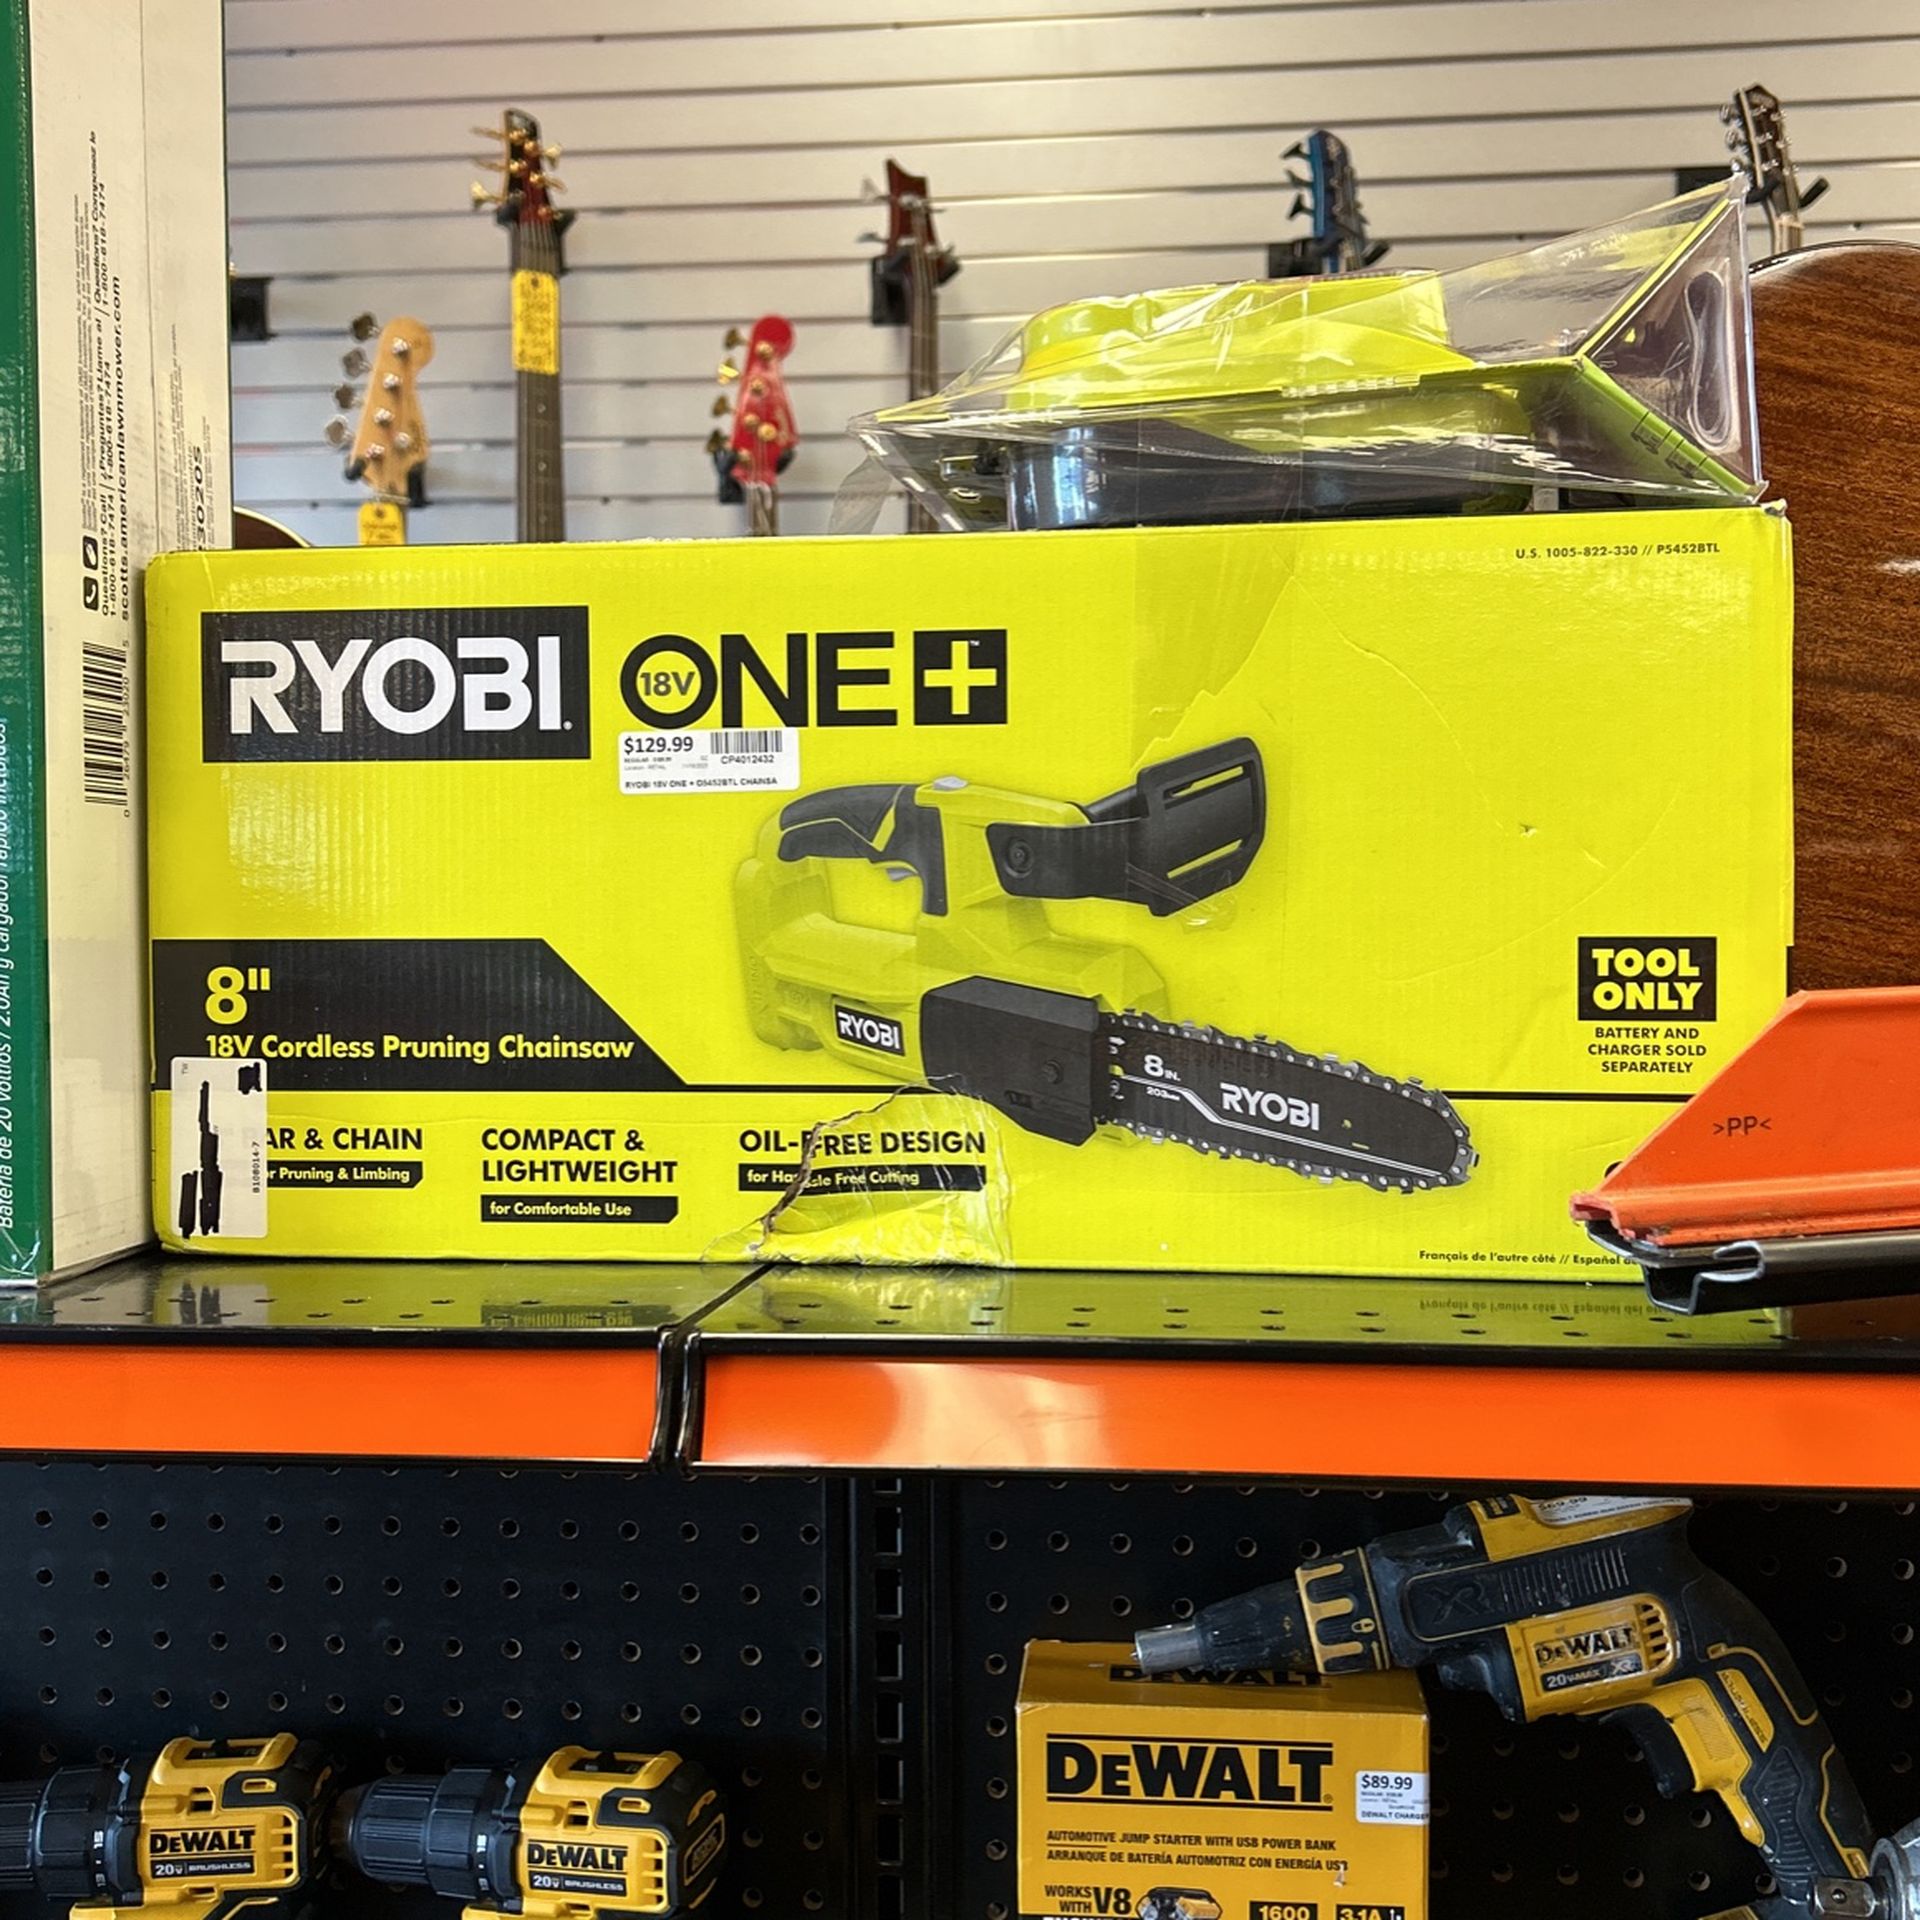 Ryobi 1+8 inch cordless pruning chainsaw, tool battery charger, new inbox